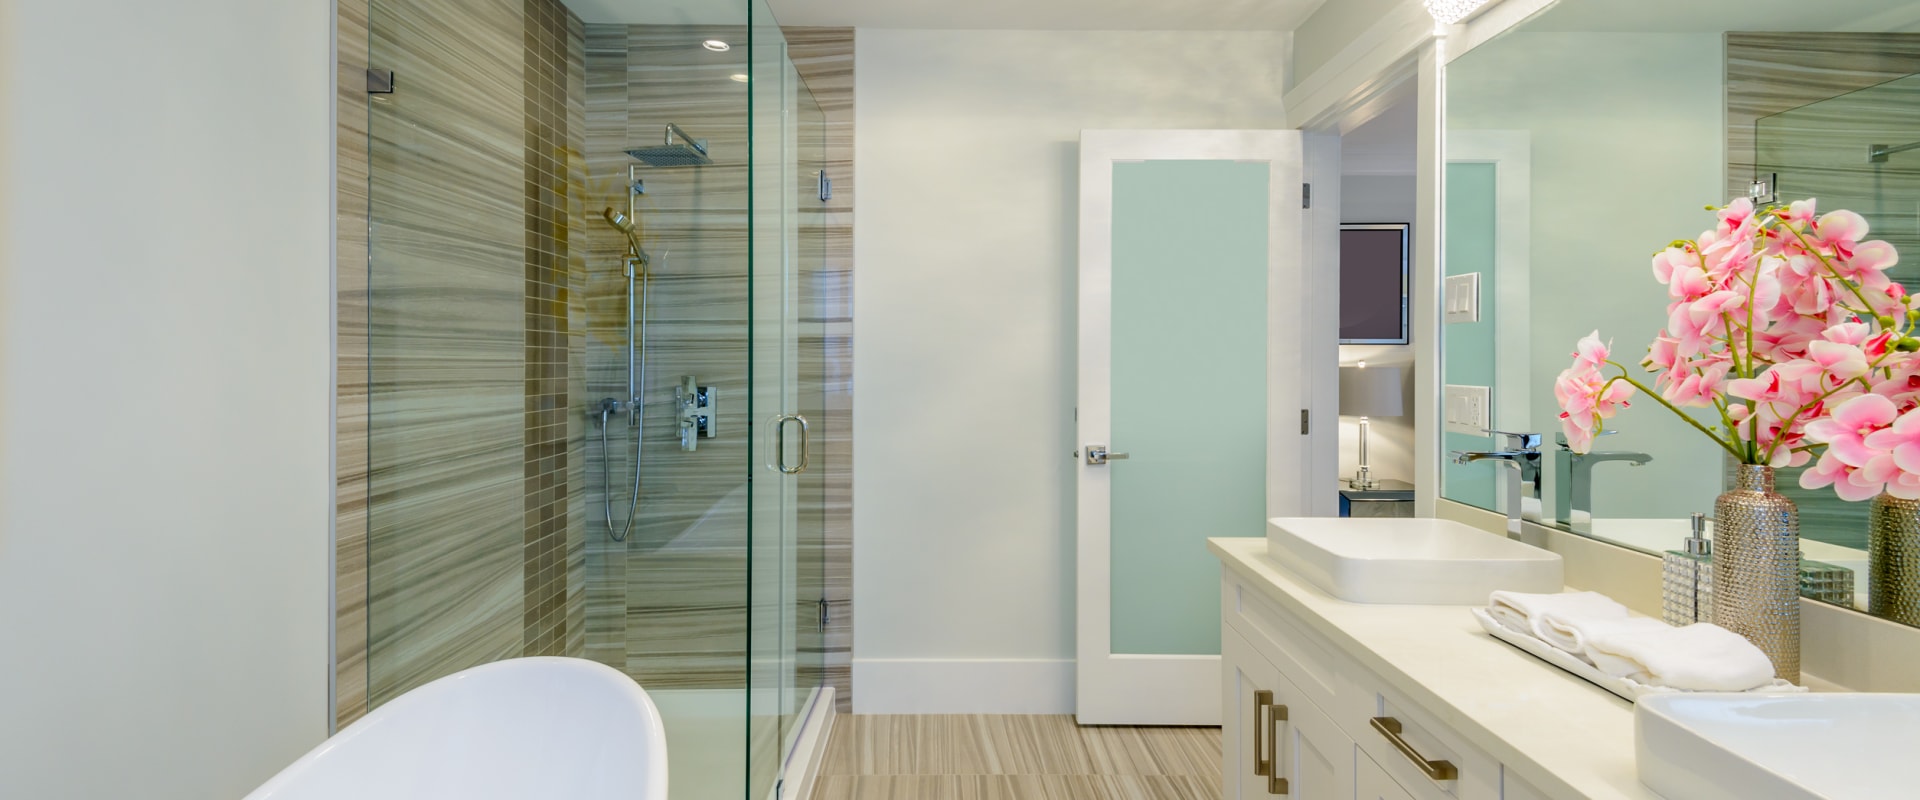 The Importance of Starting with the Floor in Bathroom Remodeling: An Expert's Perspective